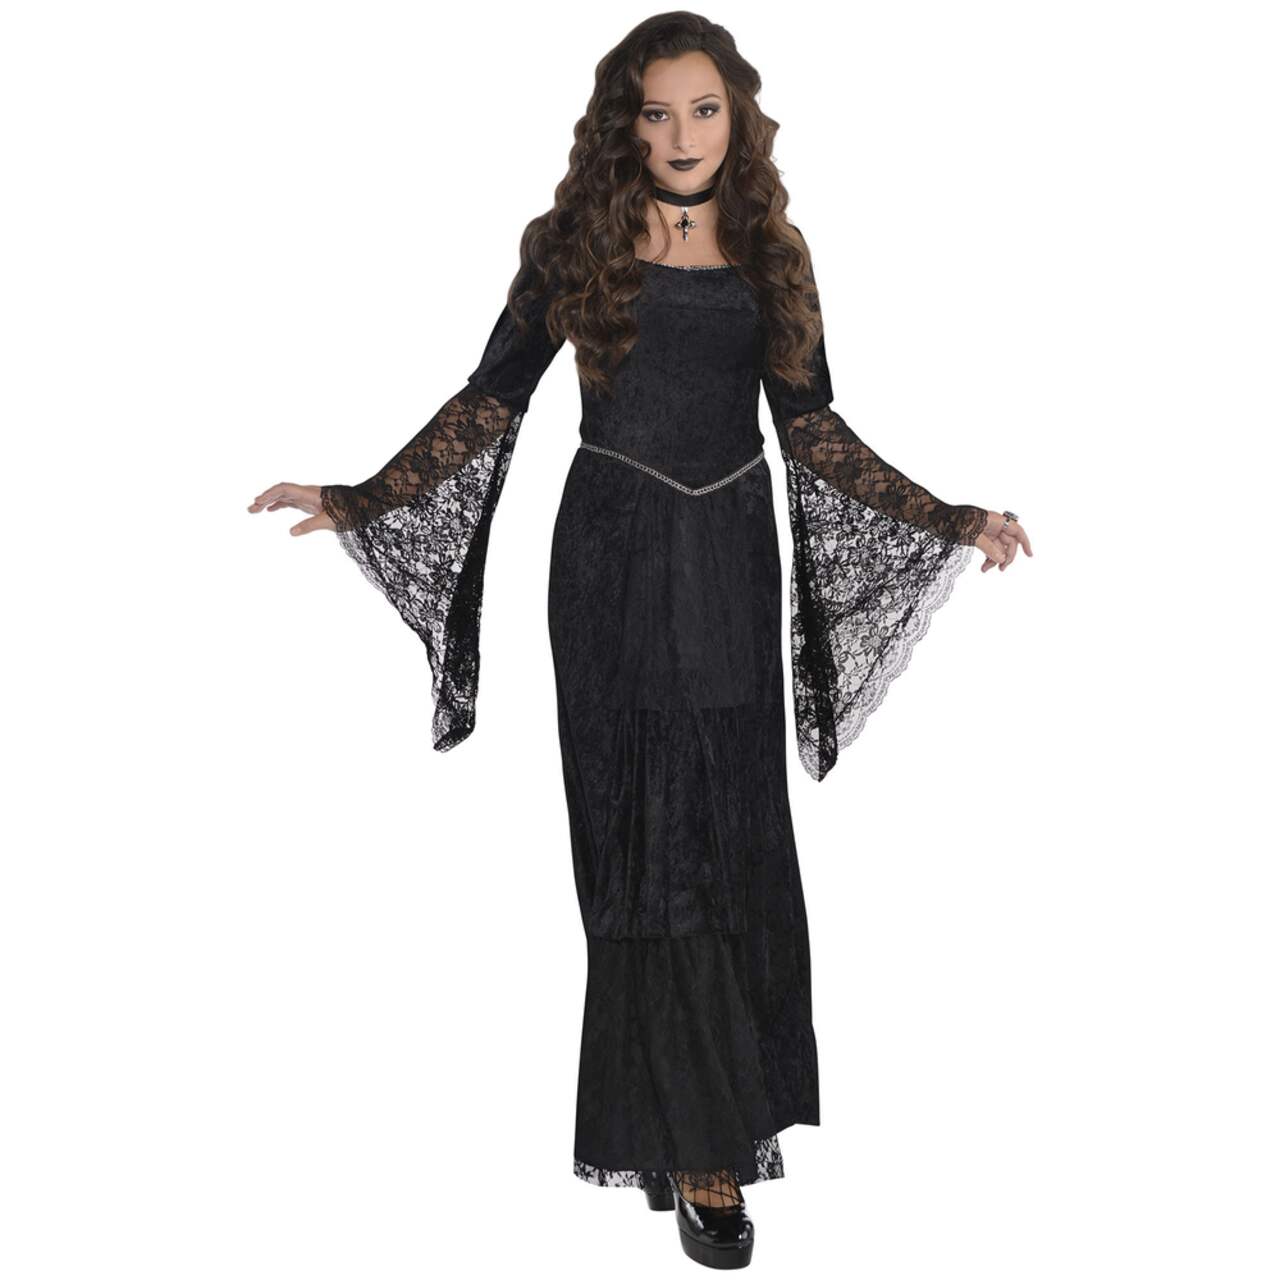 Kids' Gothic Temptress Black Dress with Necklace Halloween Costume, Small